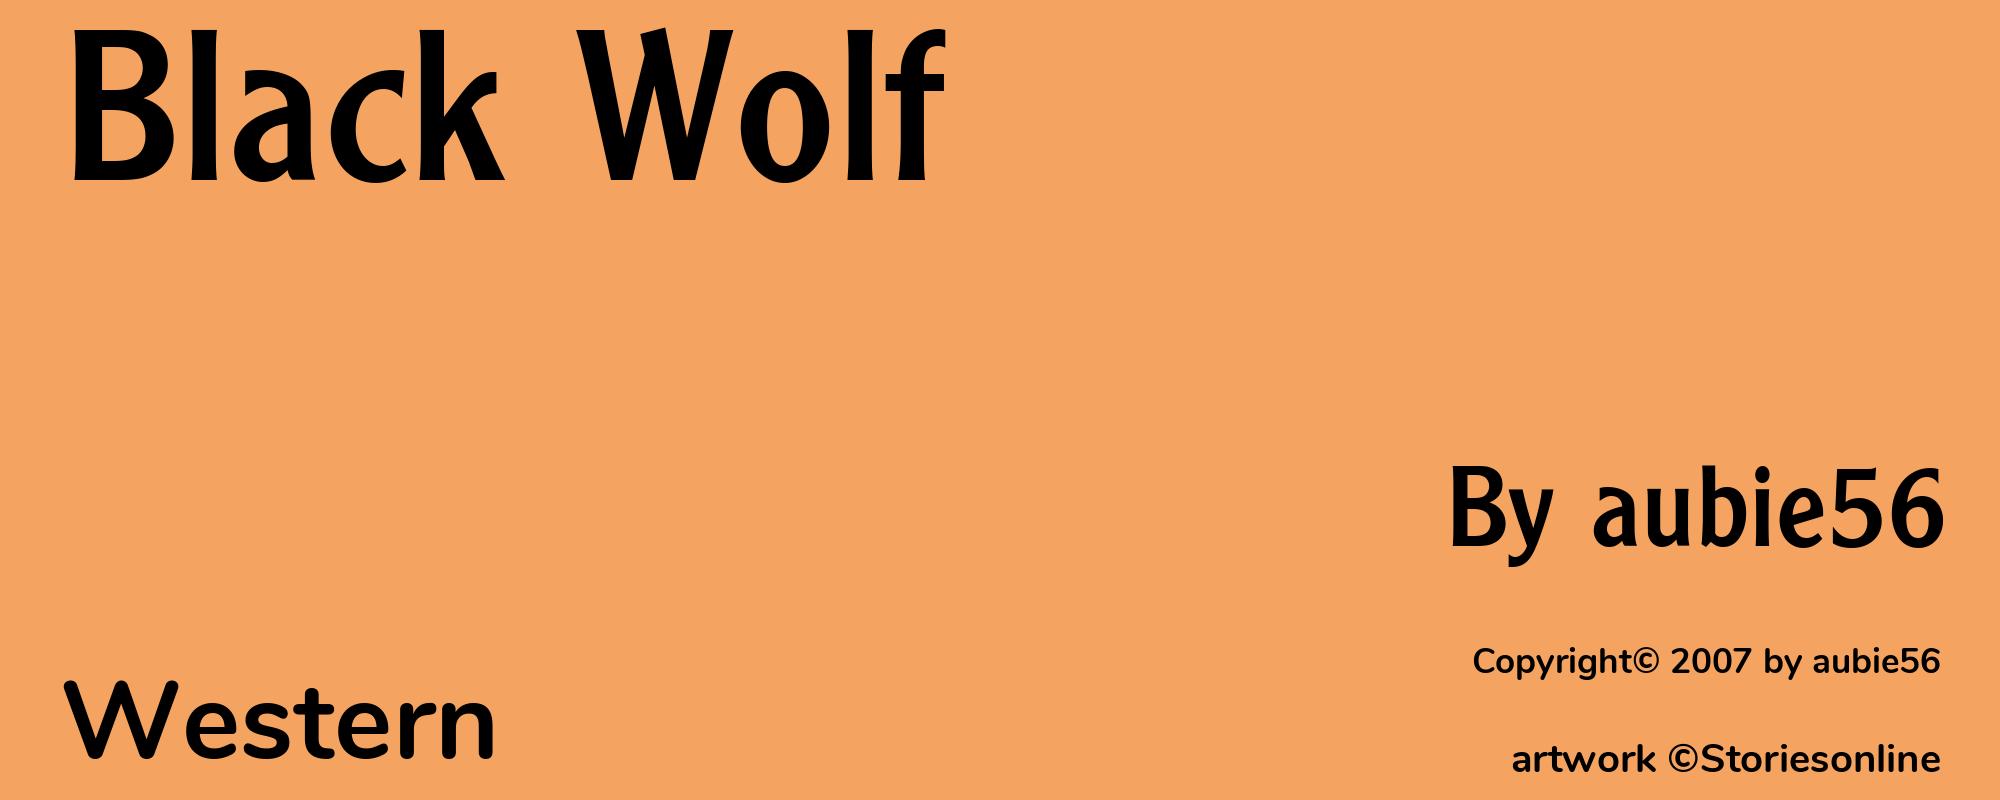 Black Wolf - Cover